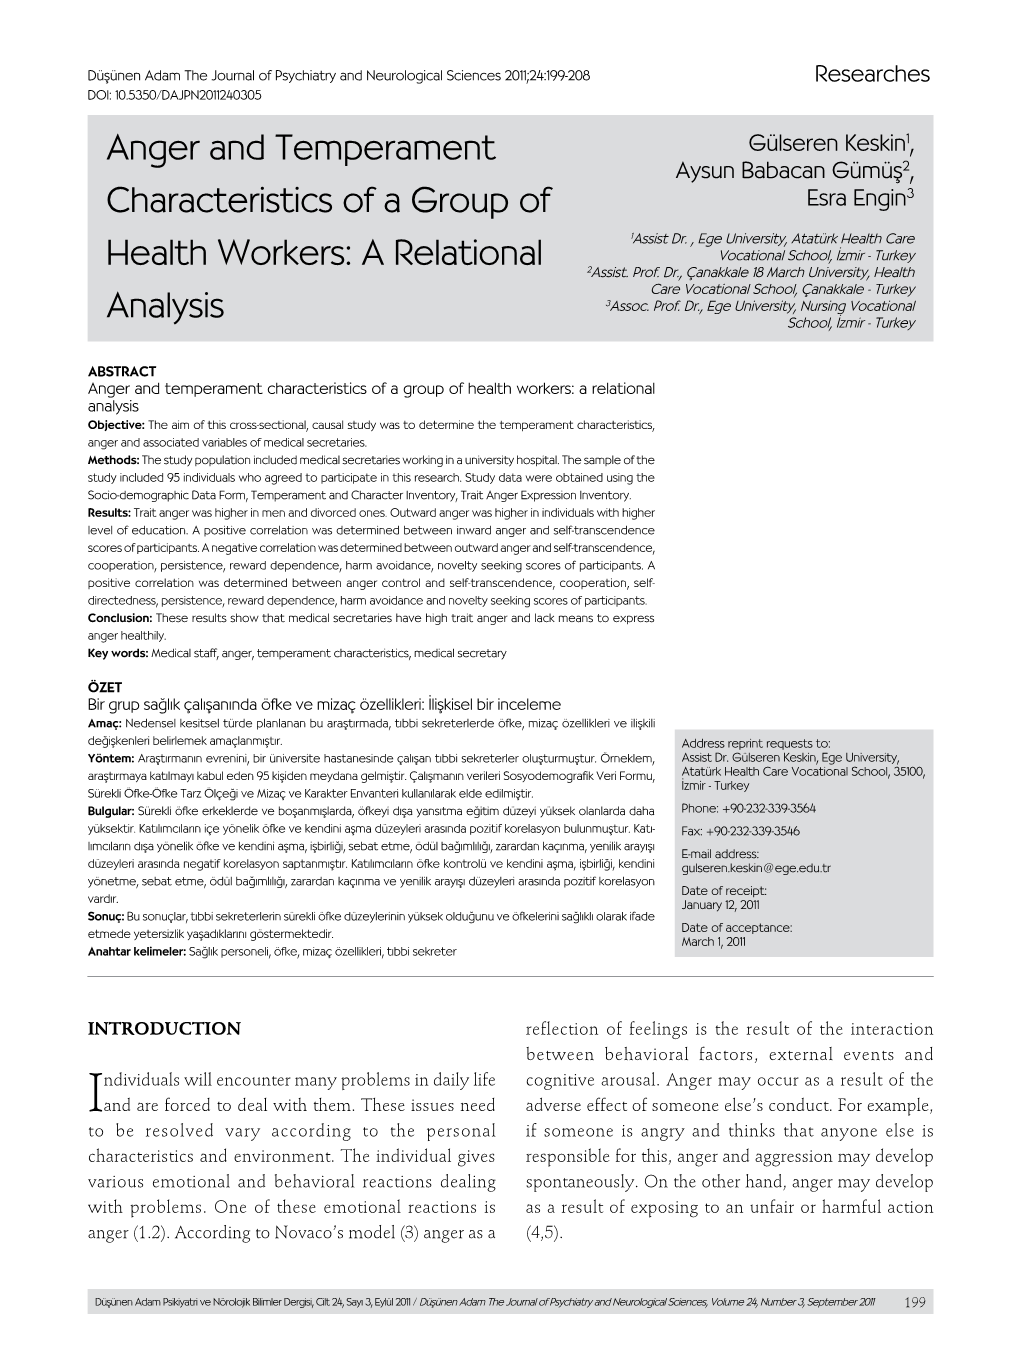 Anger and Temperament Characteristics of a Group of Health